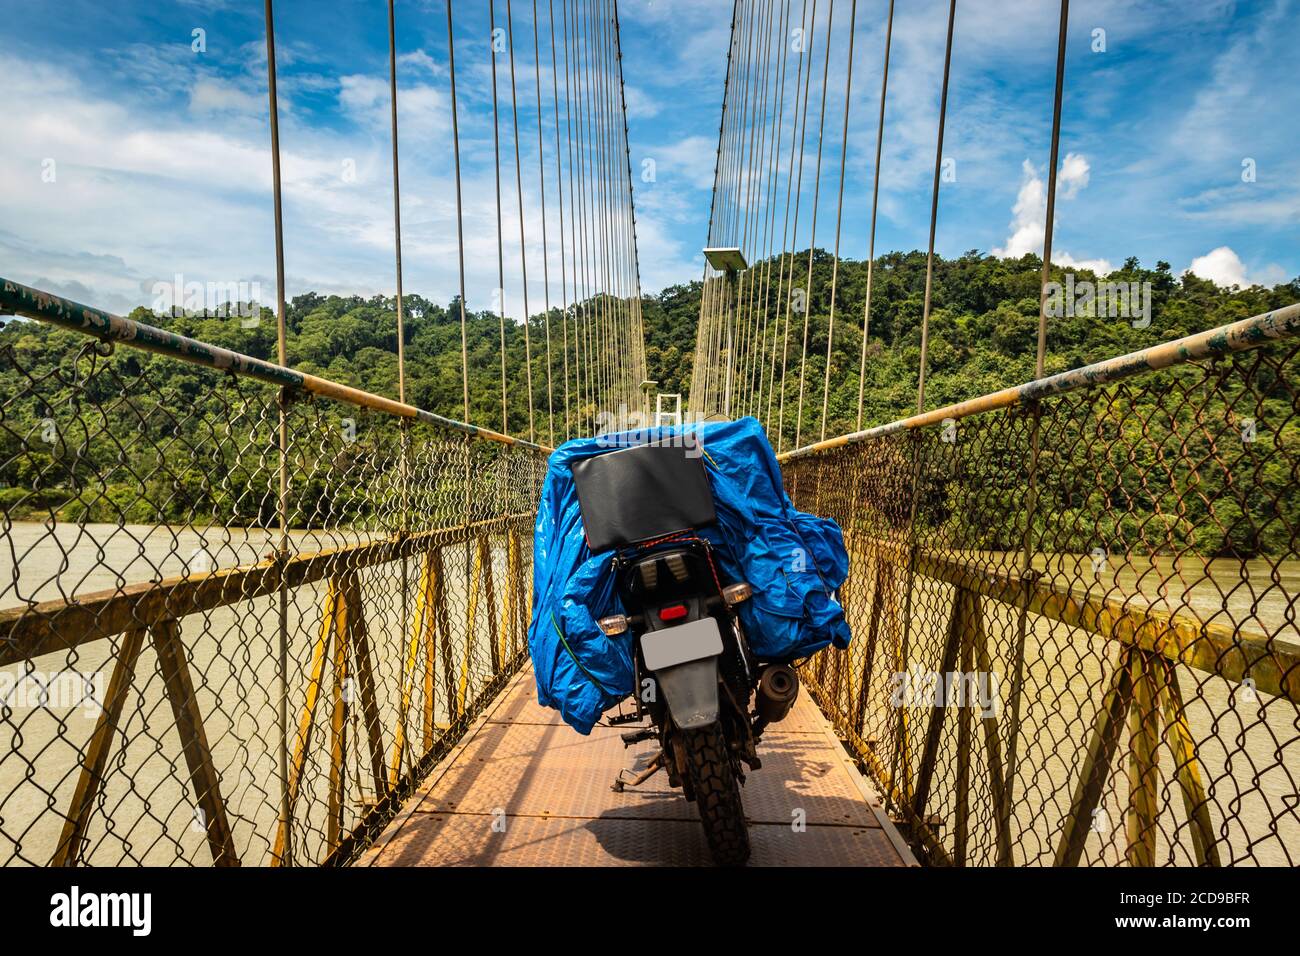 solo rider loaded motorcycle parked isolated on suspension bridge image is taken at honnavar karnataka india. it is an amazing experience to ride moto Stock Photo